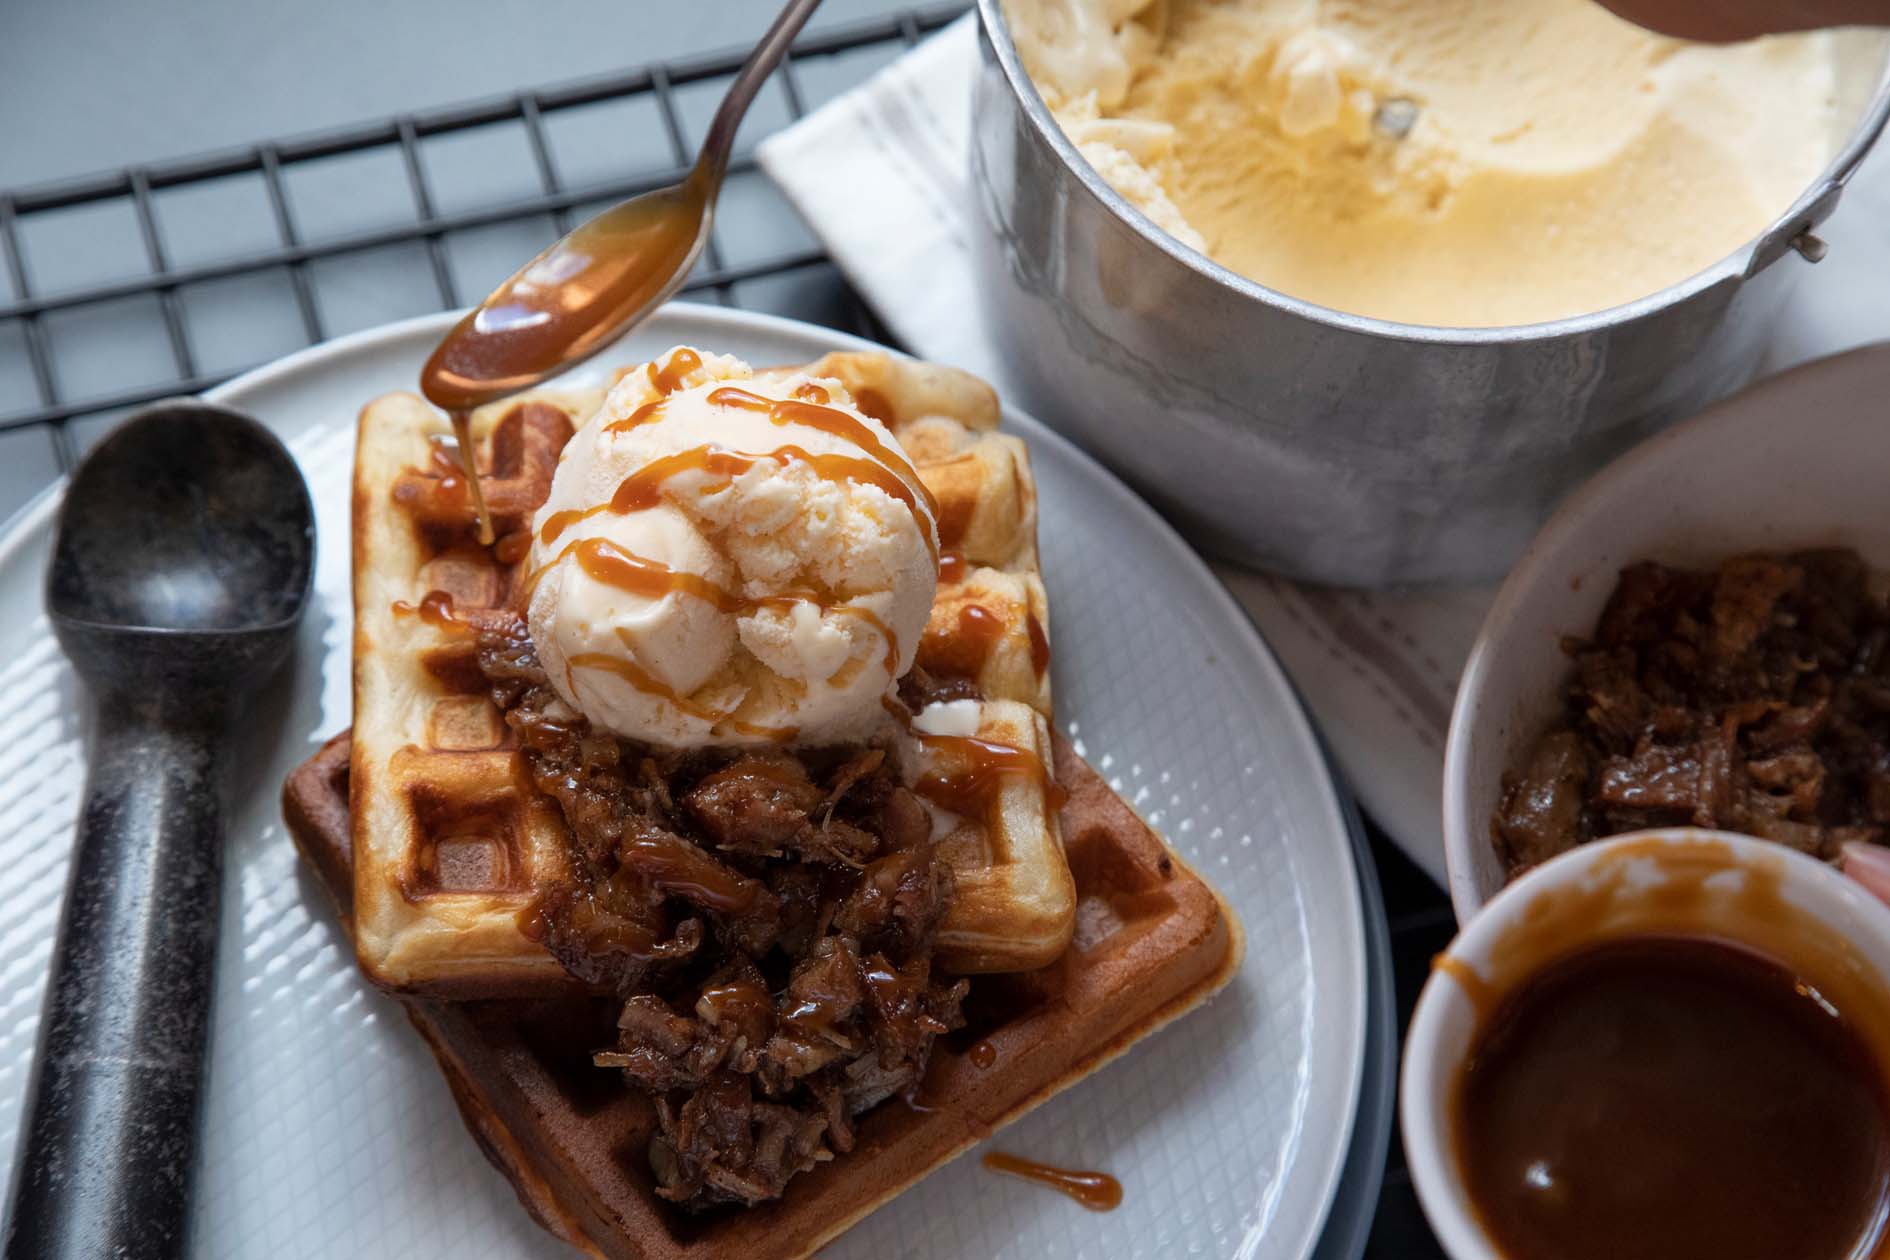 Candied pork belly with homemade waffles, butterscotch caramel and smoked vanilla ice cream